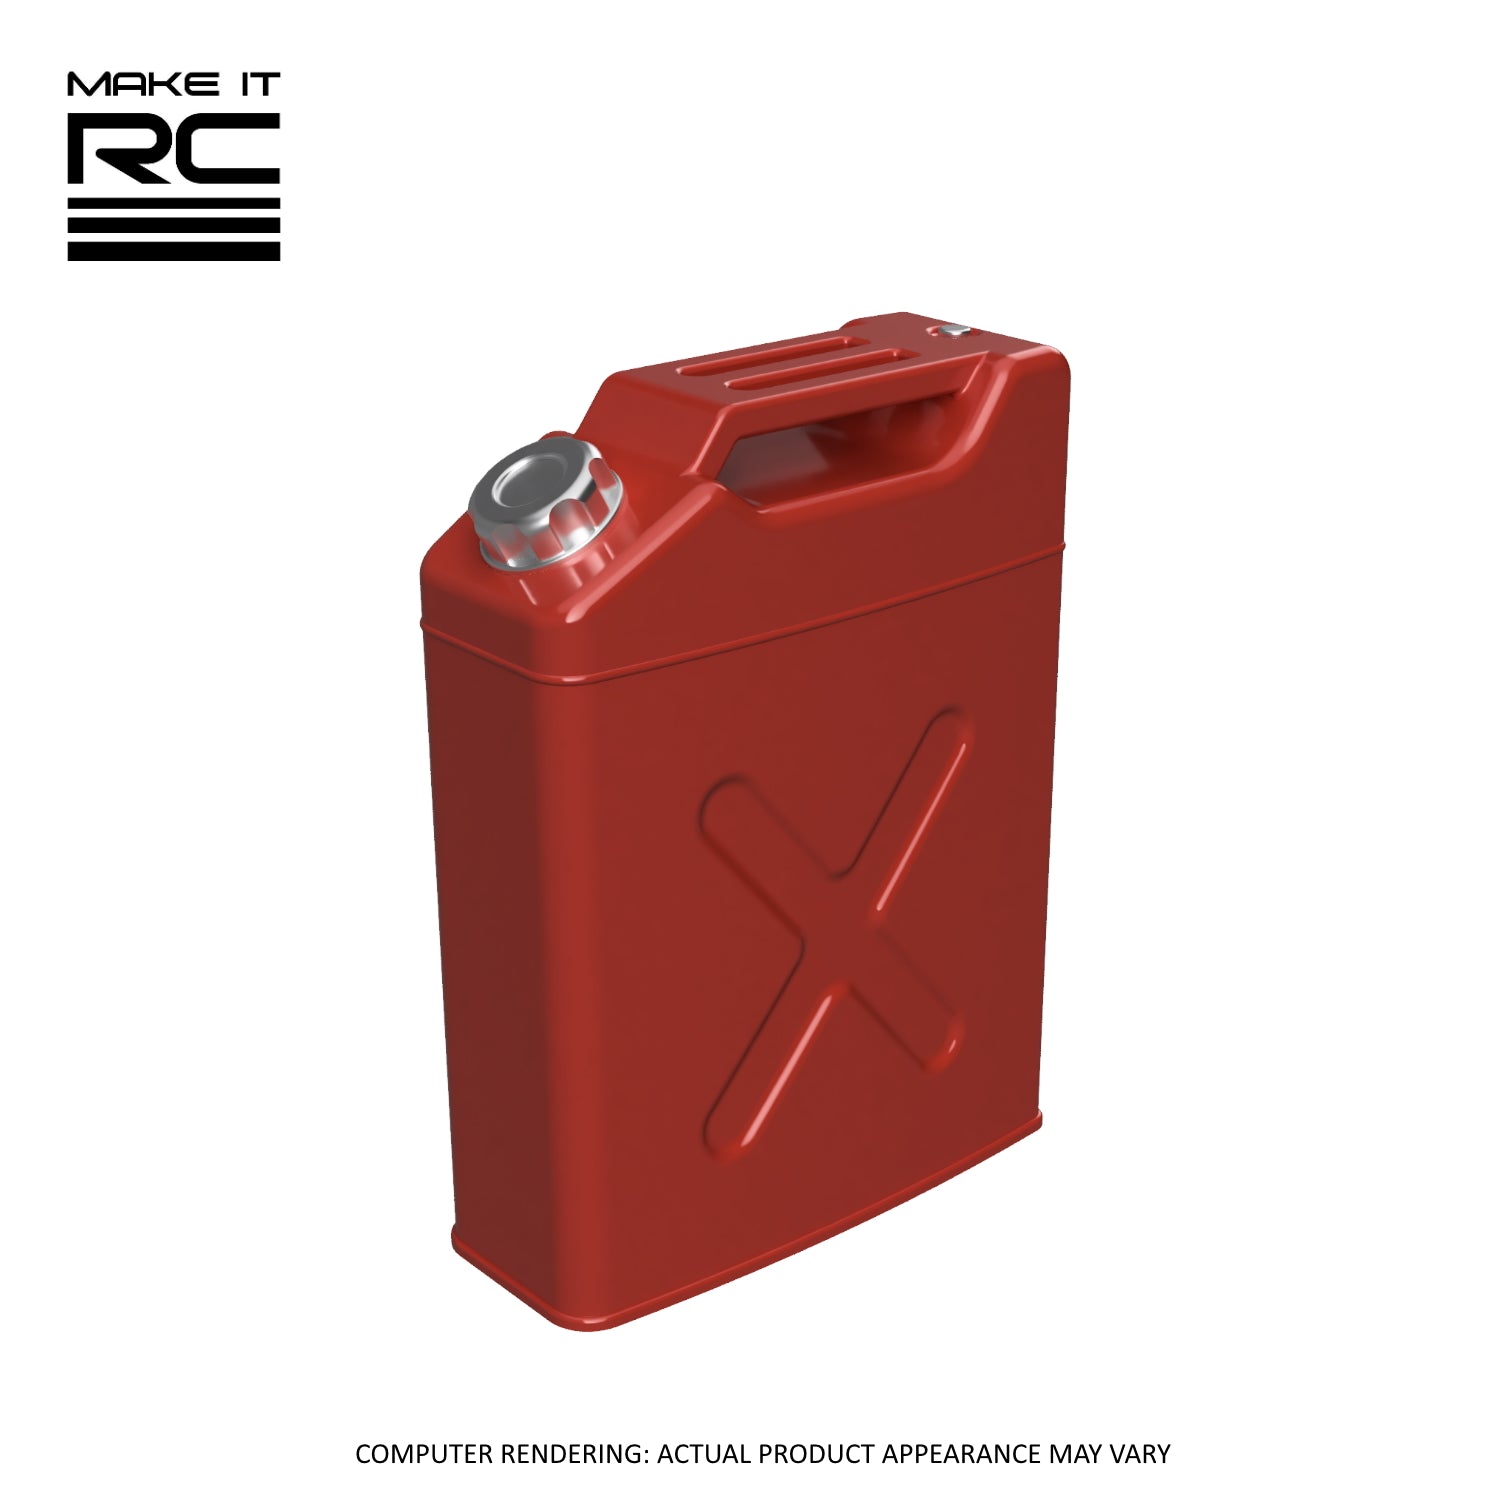 Make It RC 1/10 Scale Jerrycan